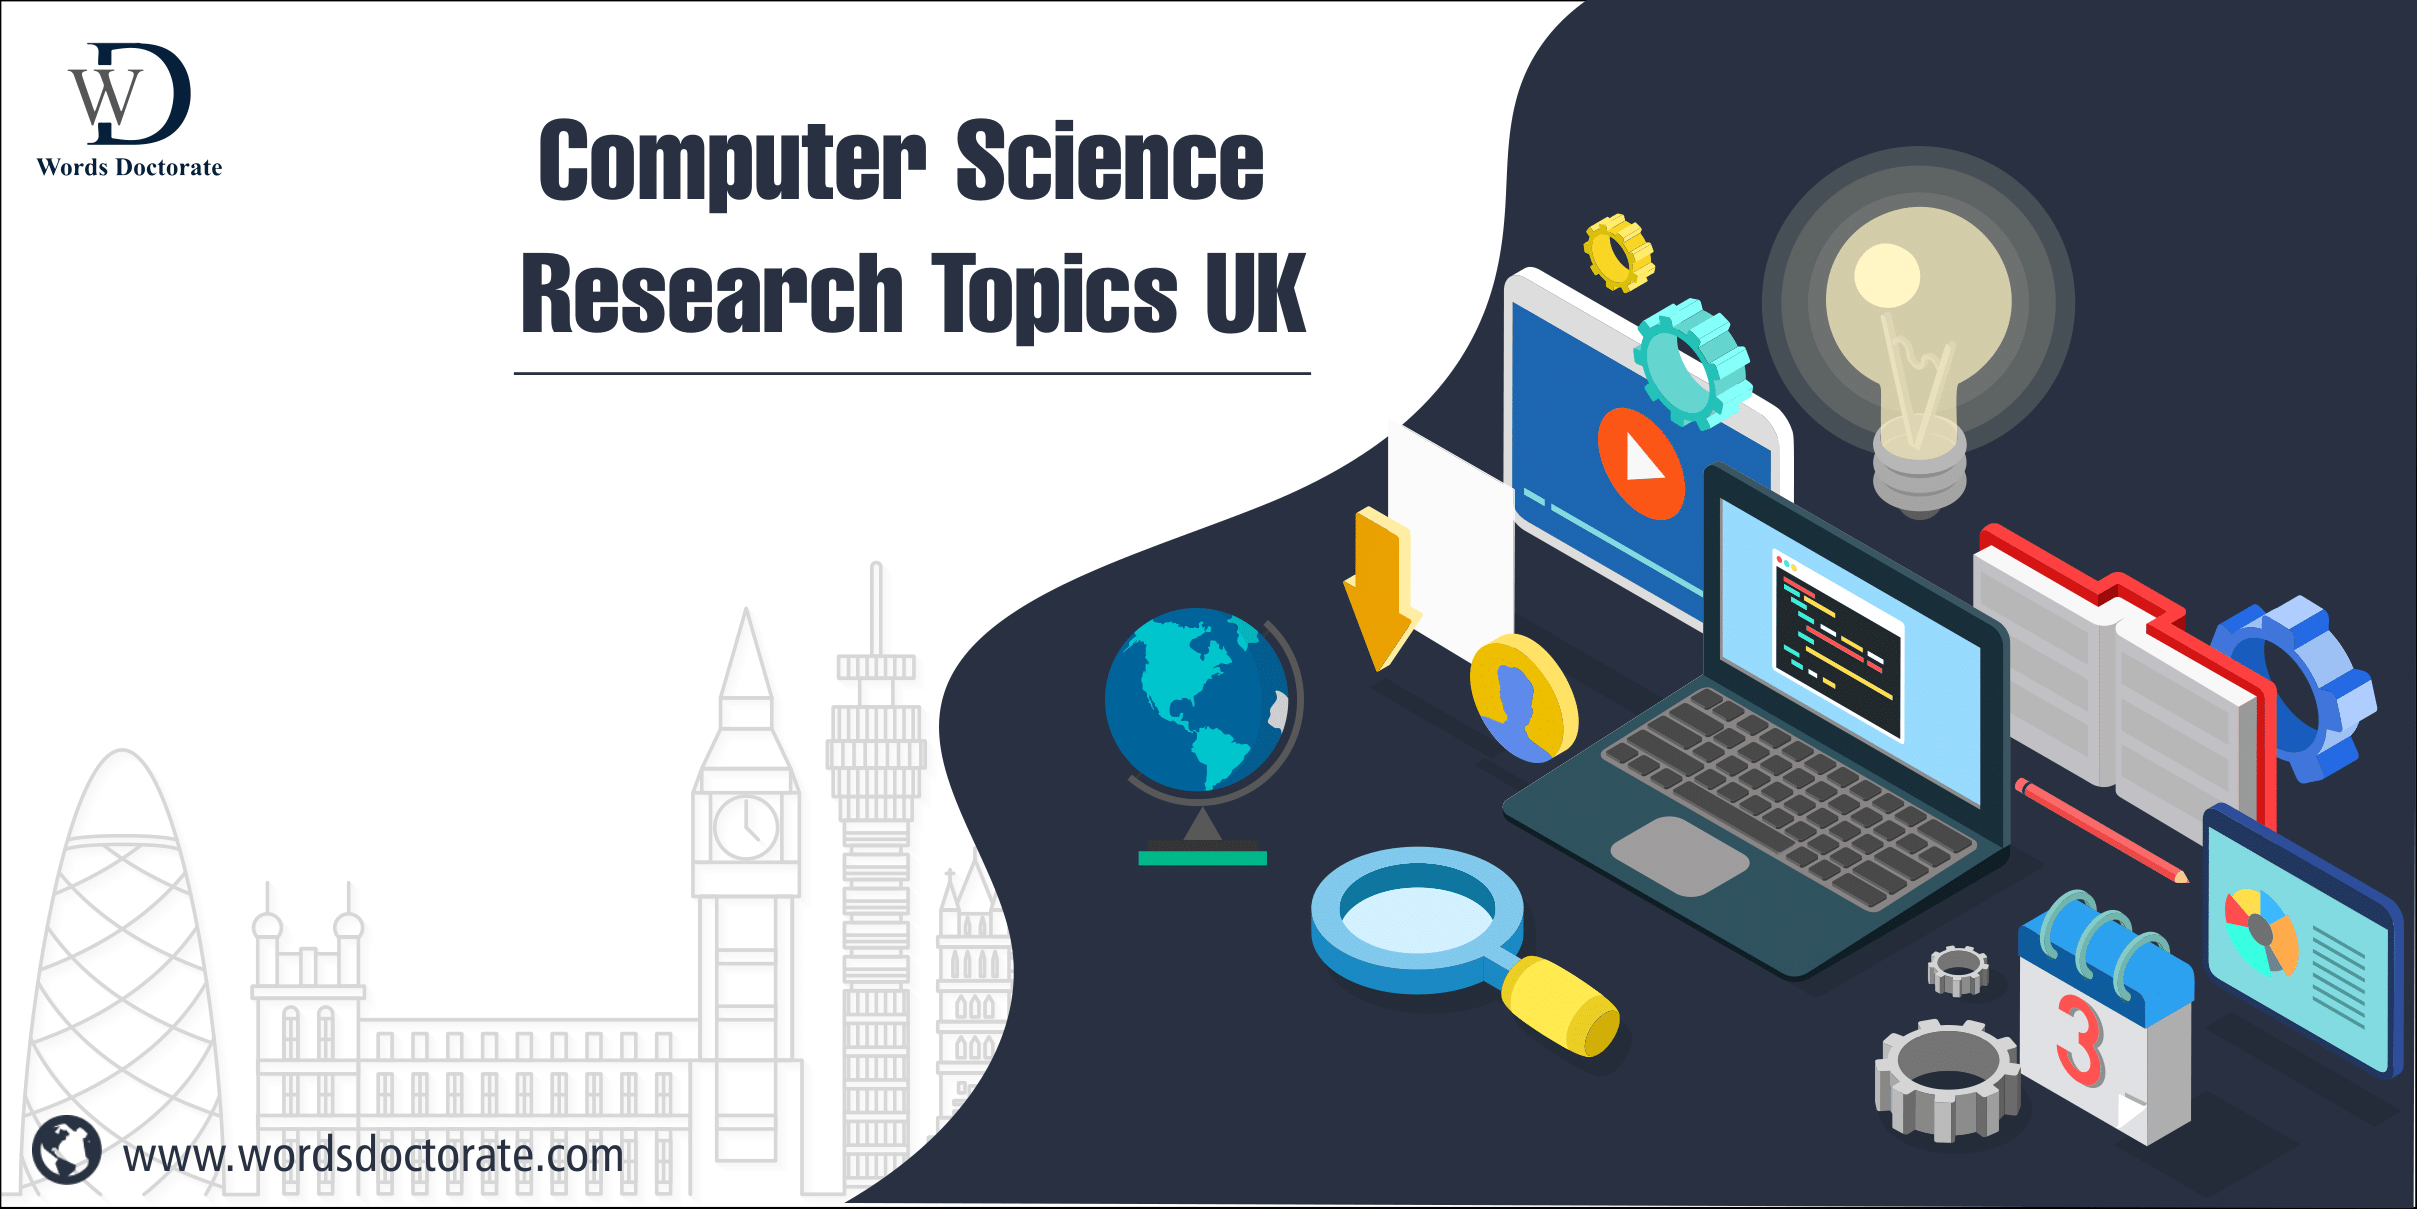 Computer Science Research Topics UK